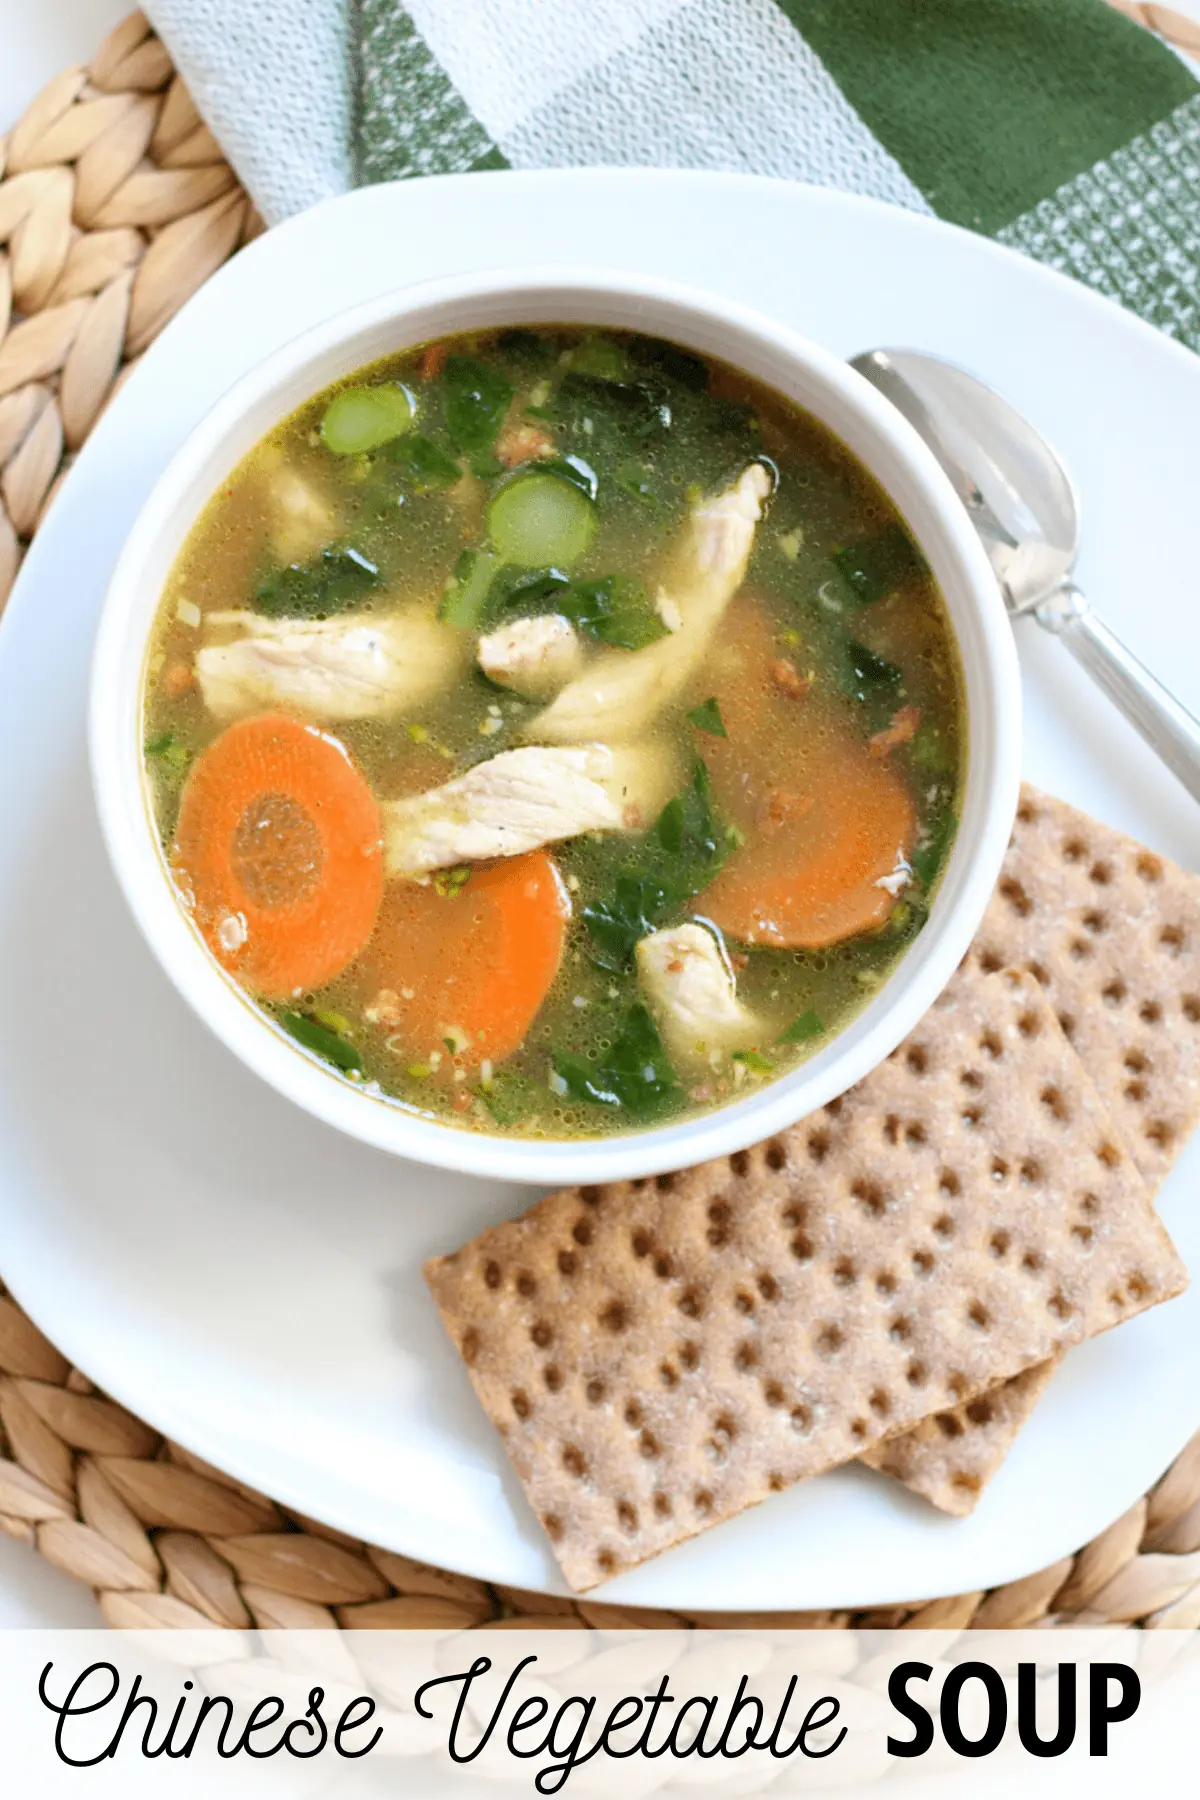 bowl of soup on a plate with crackers and a spoon